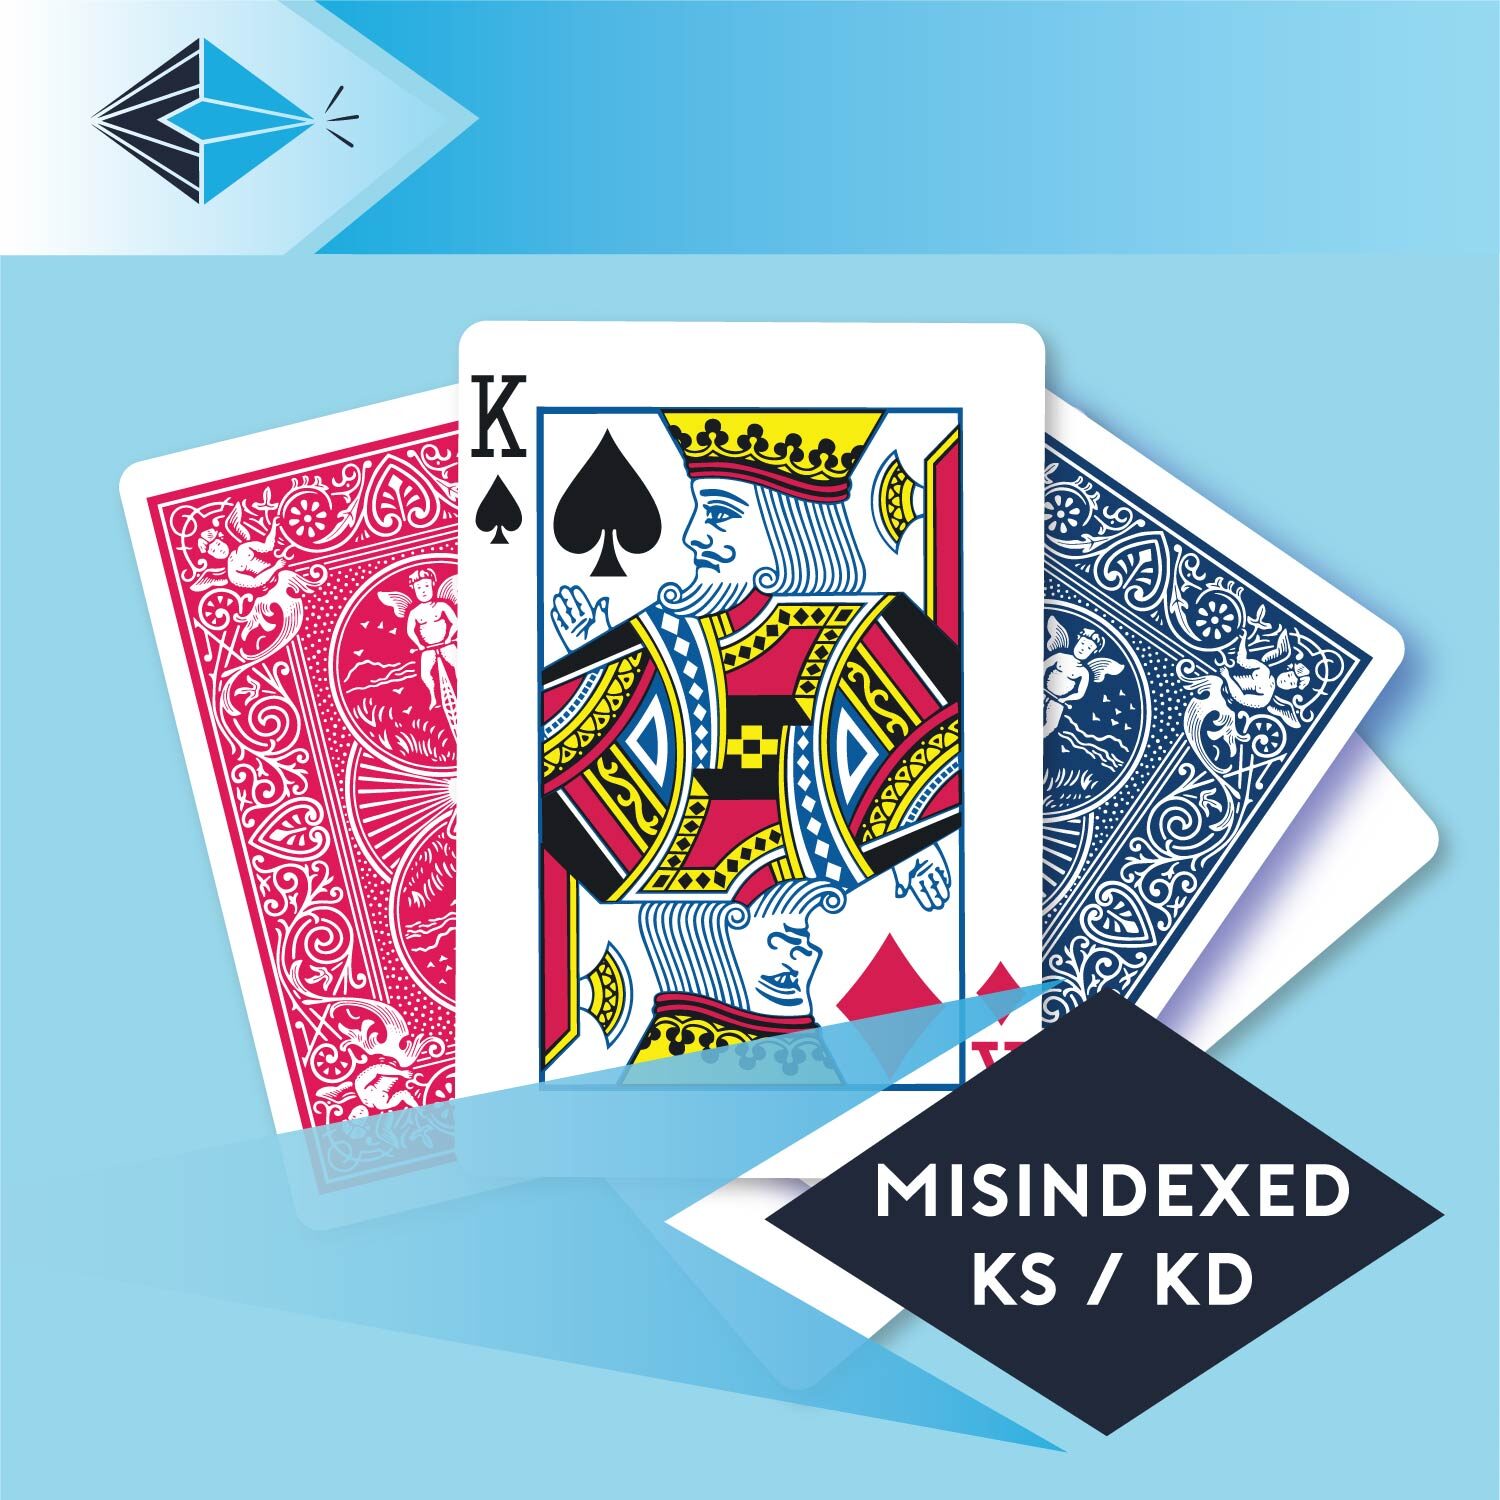 mis-indexed-king-spades-diamonds-ks-kd-playing card for magicians printing printers Stockport Manchester UK